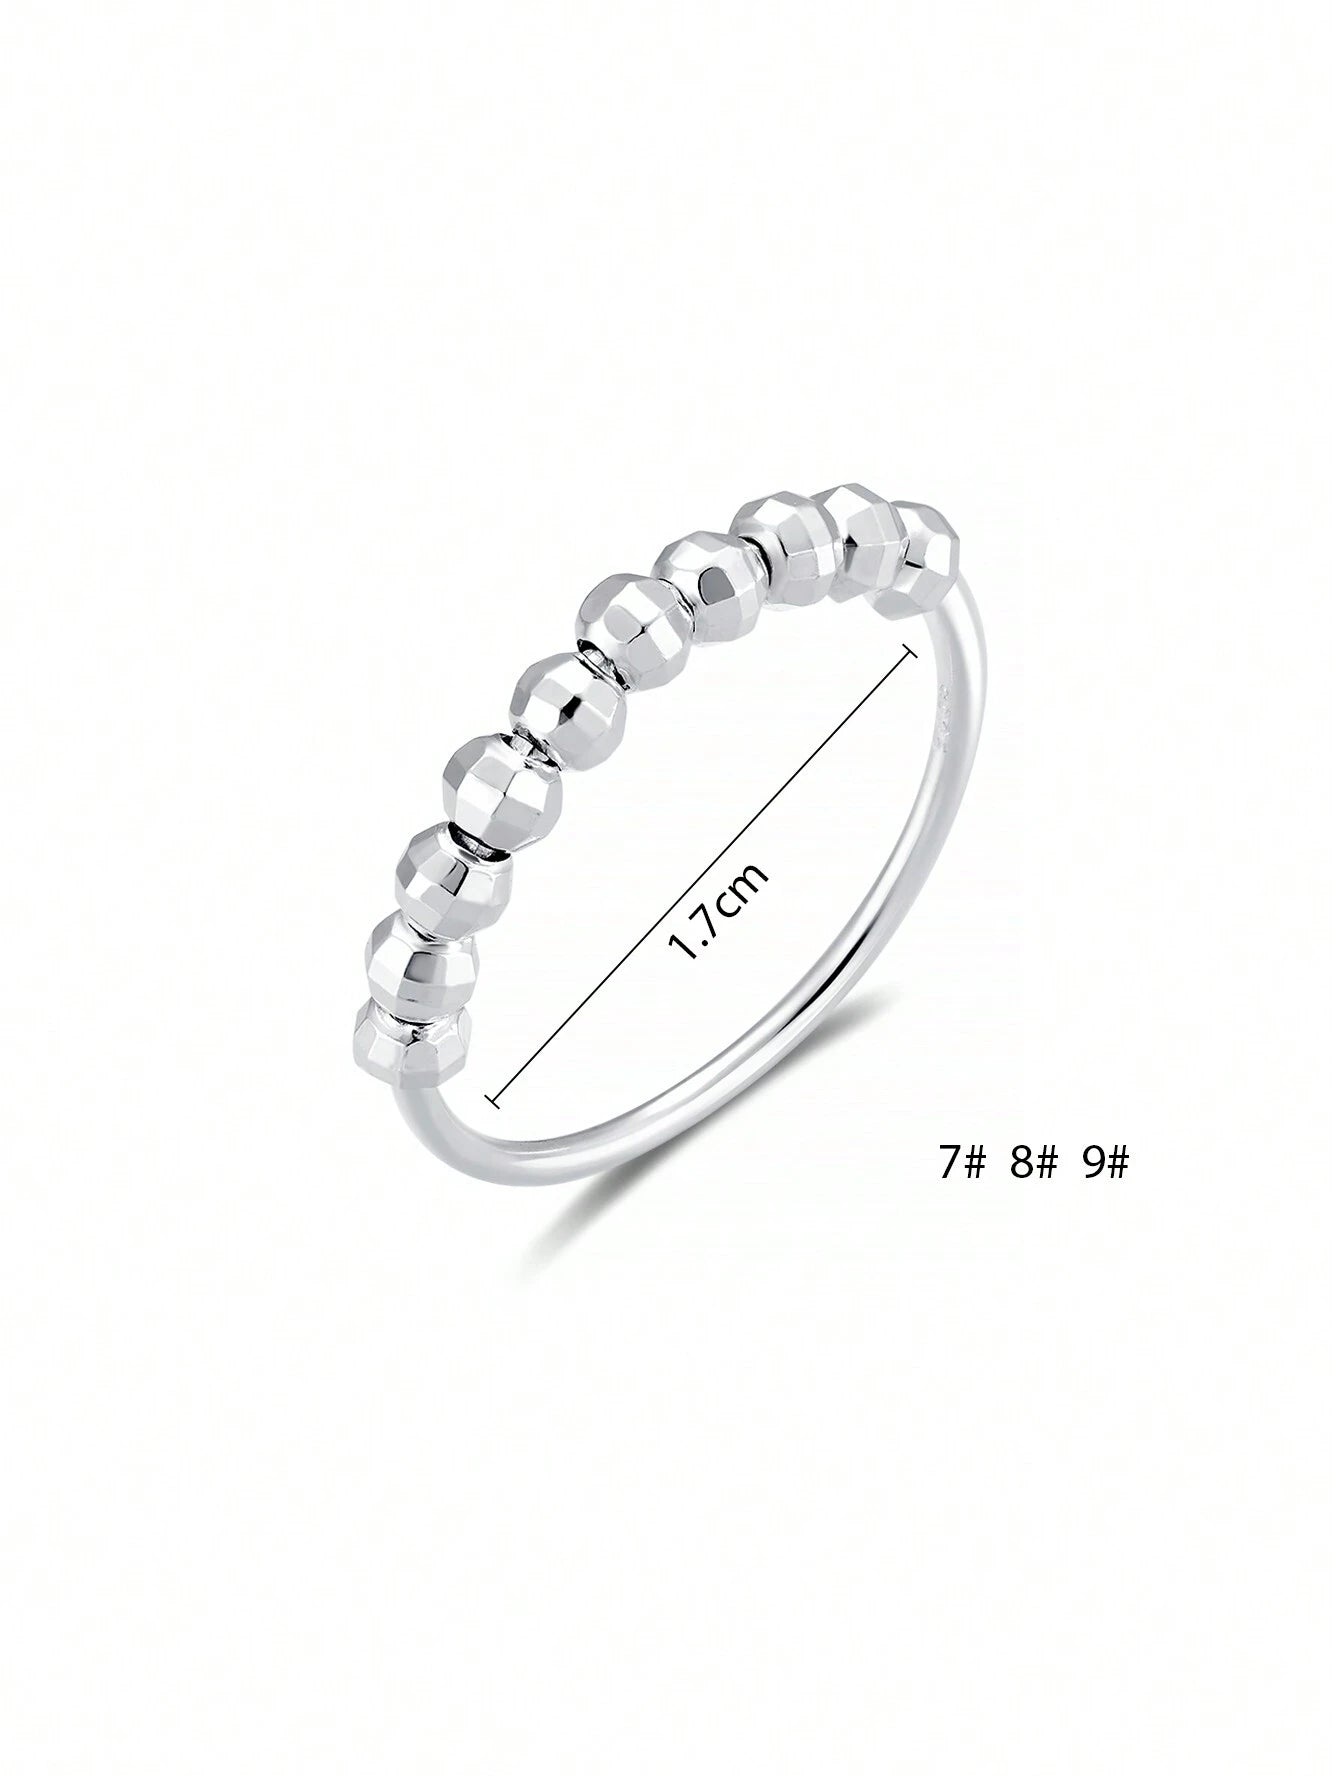 1pc Unique Personality S925 Sterling Silver Ring with Geometric Design and Rotating Ball - Suitable for Women's Daily Wear.